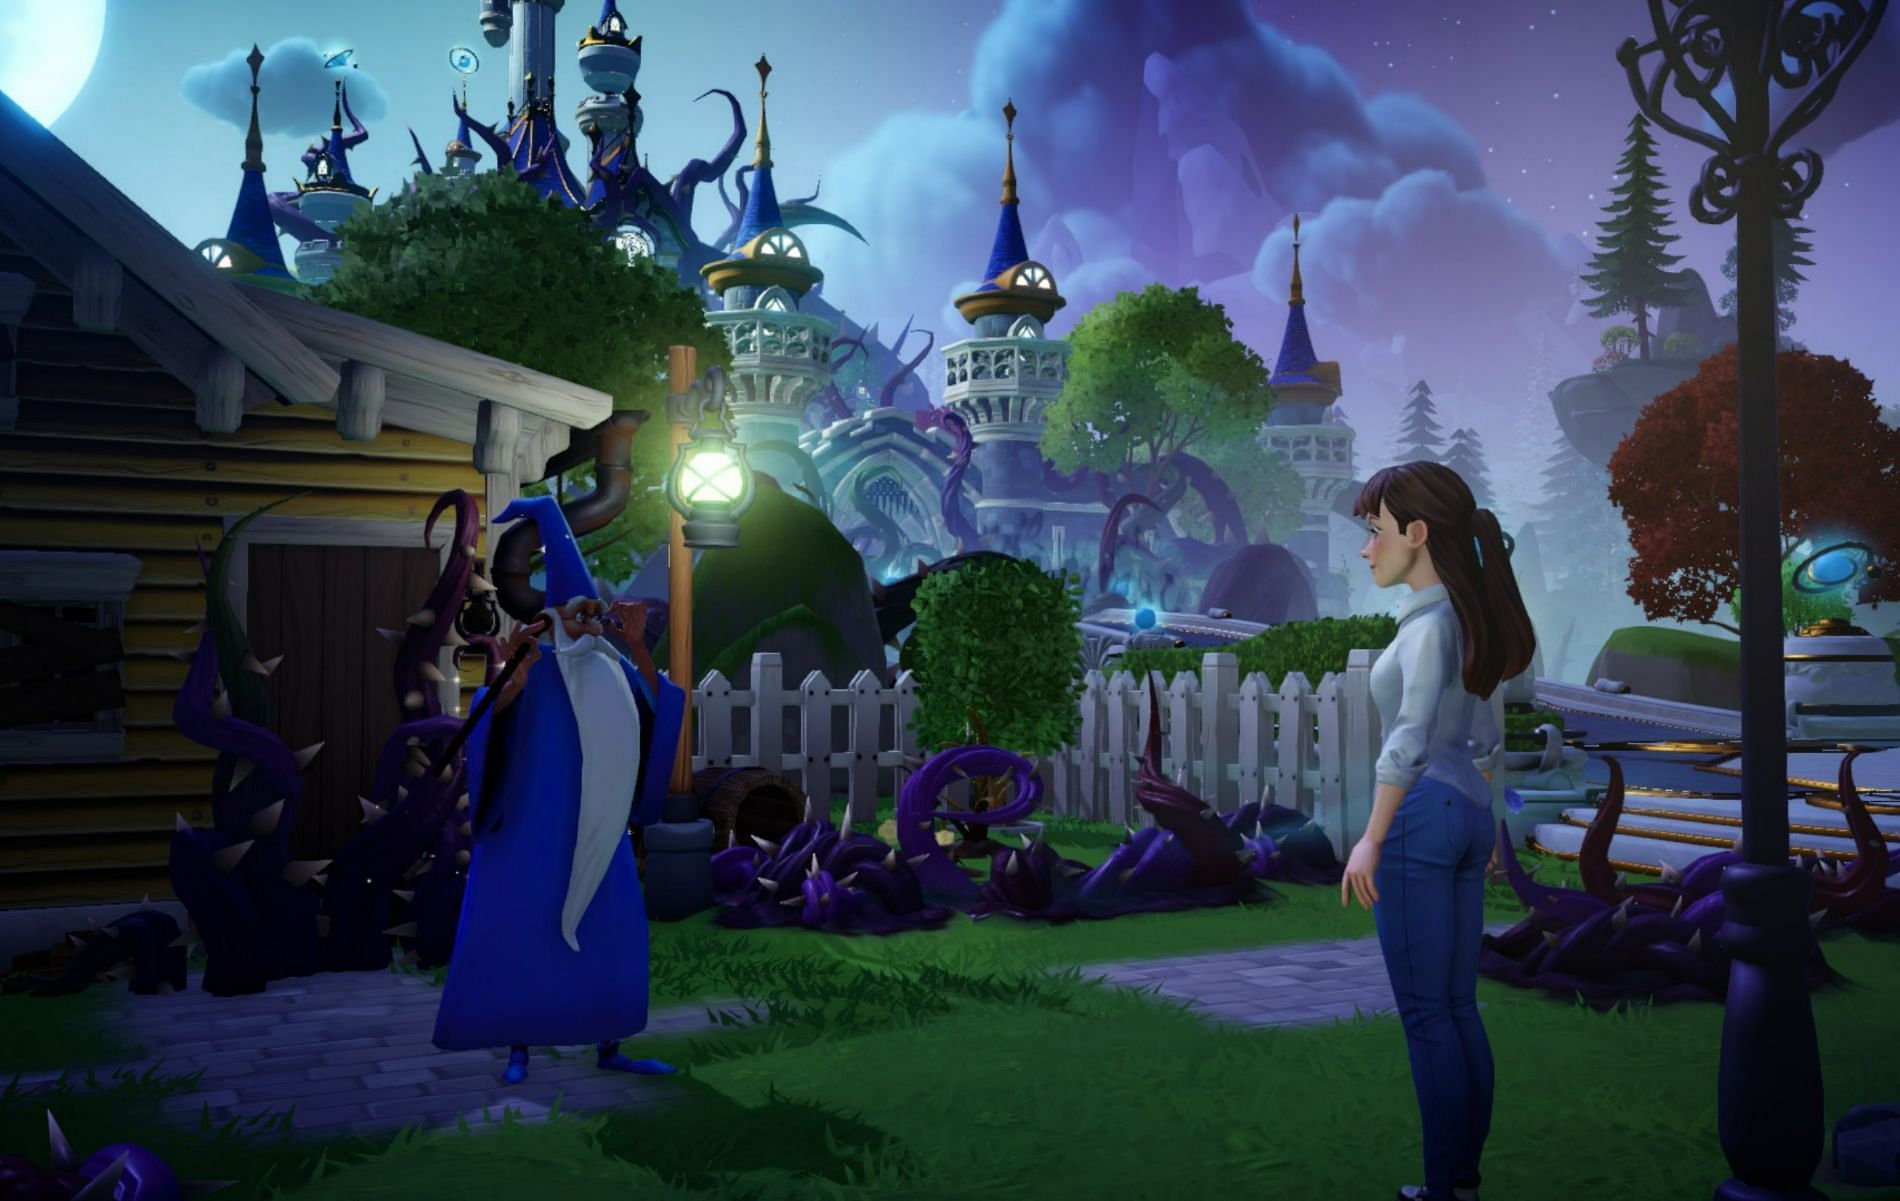 Disney Dreamlight Valley, An Upcoming Free-To-Play Life-Simulation